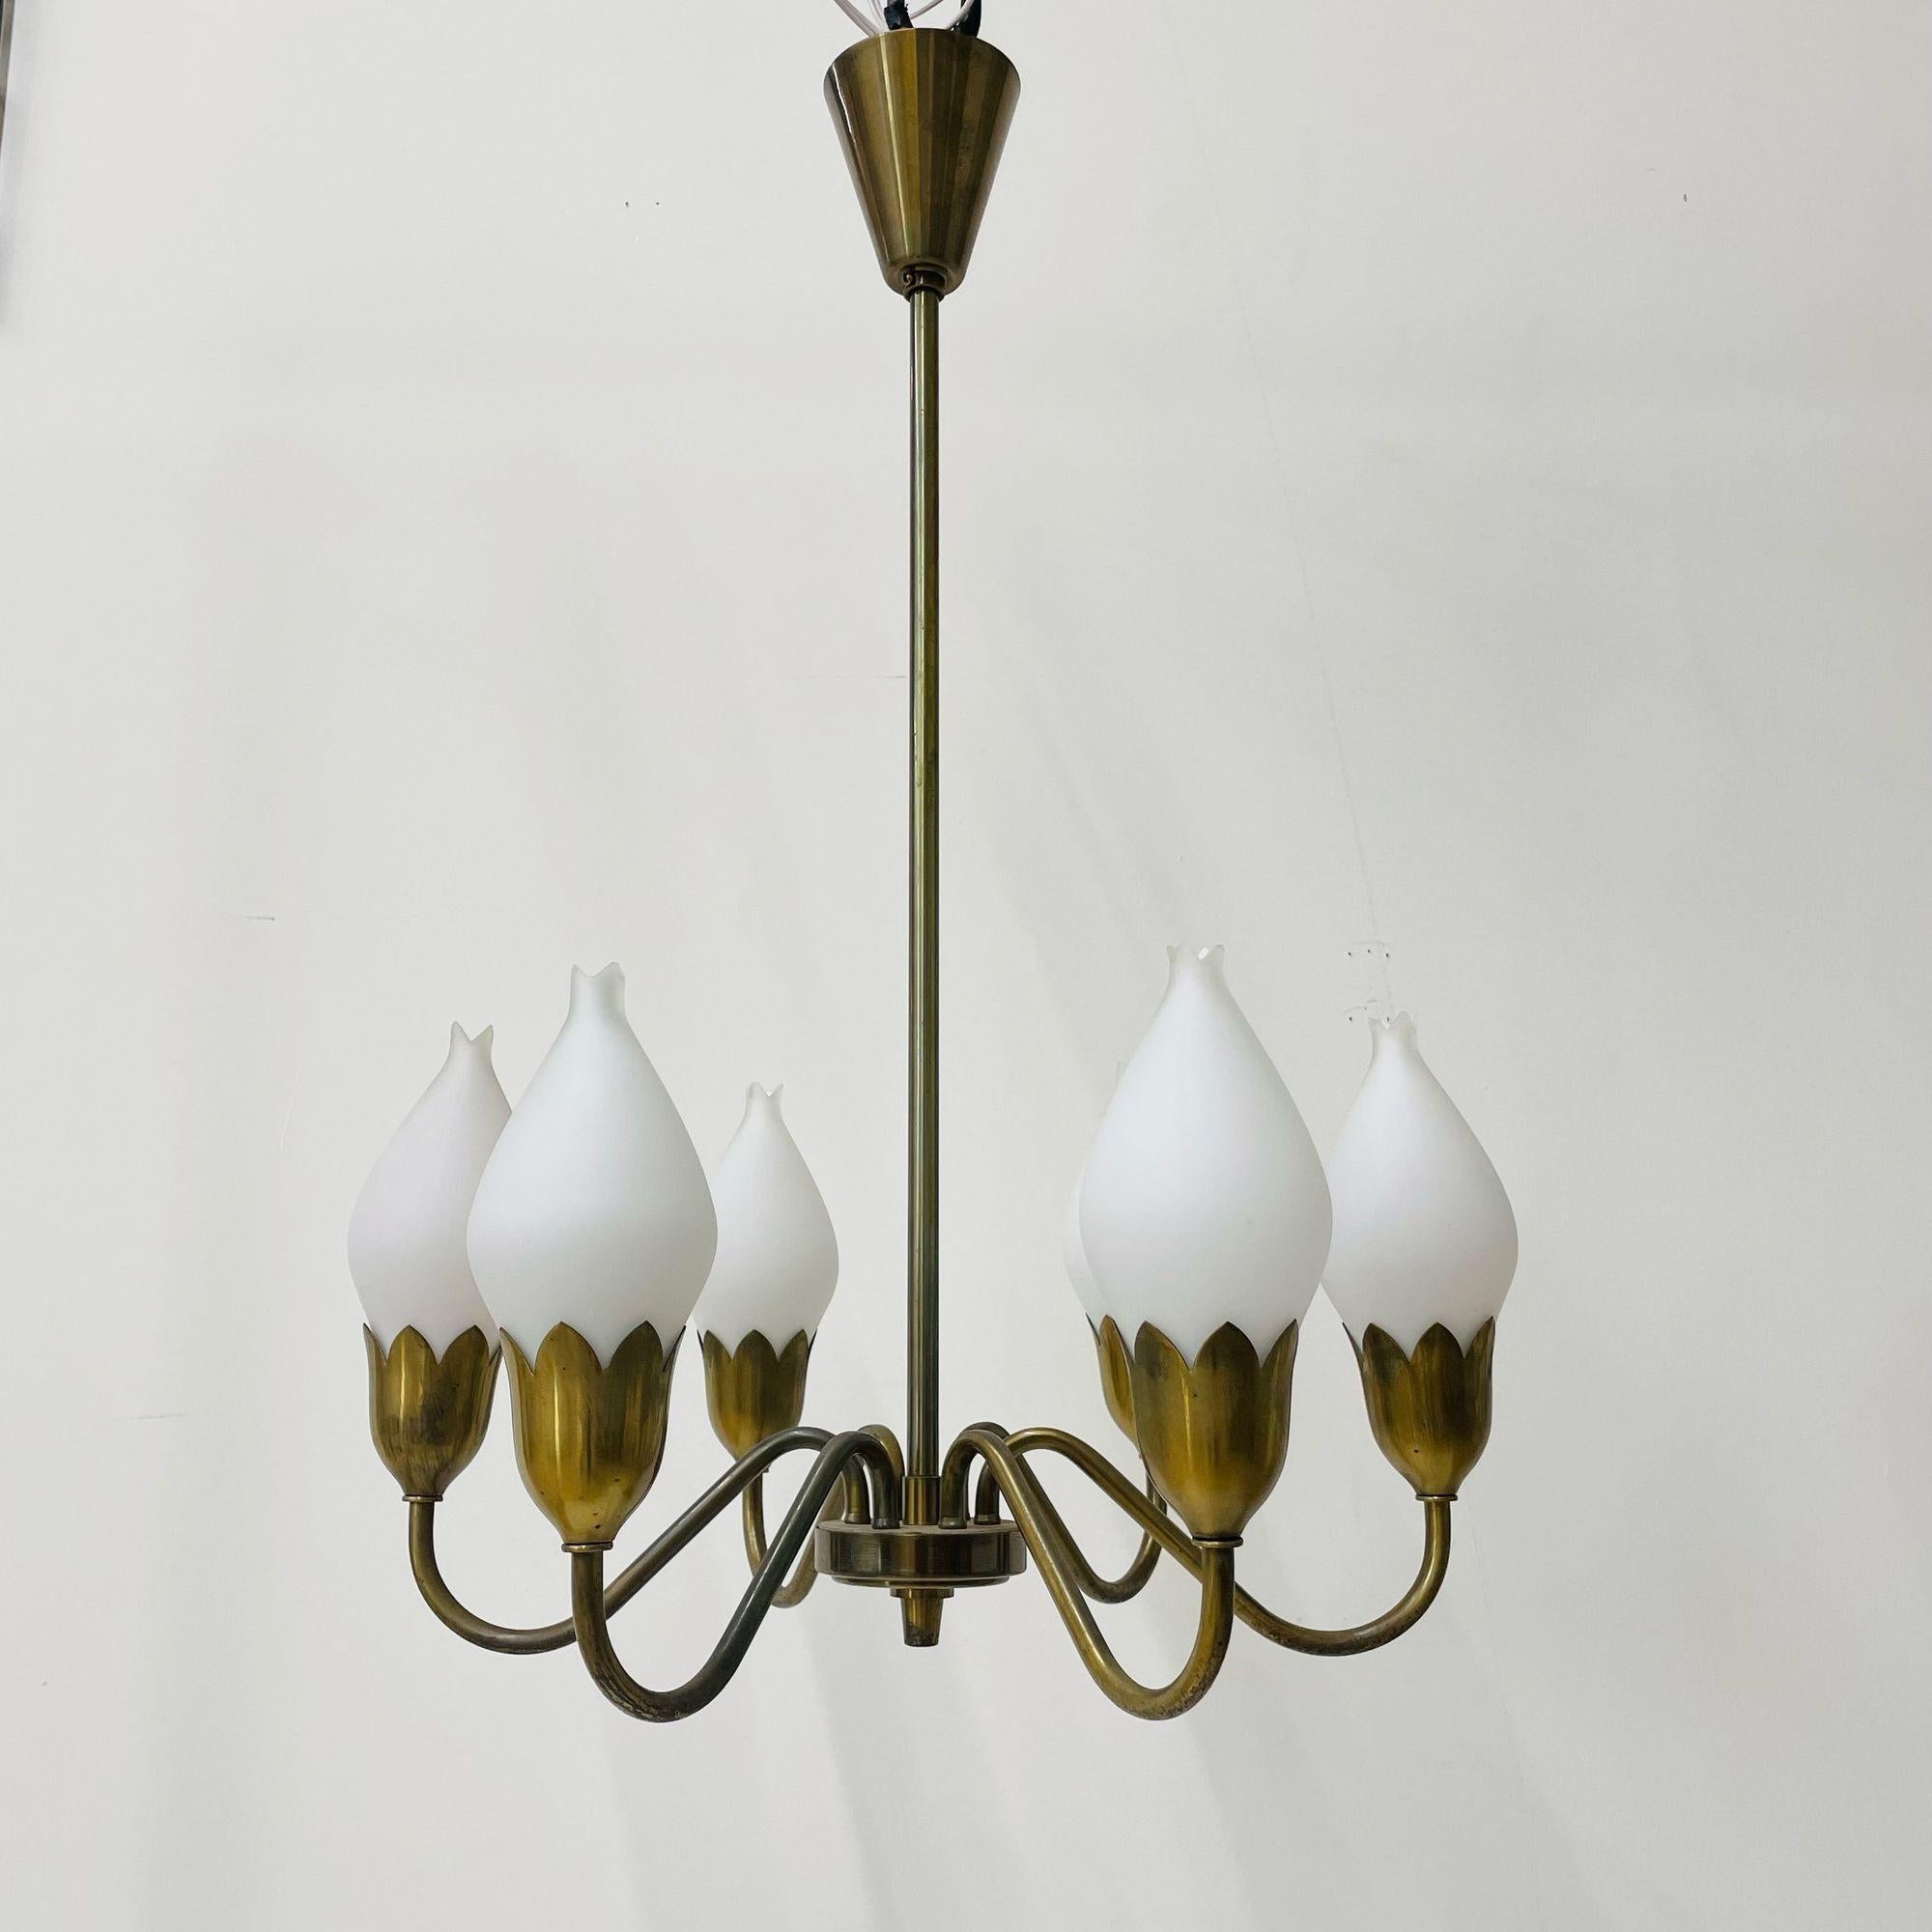 Pair of Danish Mid-Century Modern Tulip Form Chandeliers / Pendants, Opal Glass In Good Condition For Sale In Stamford, CT